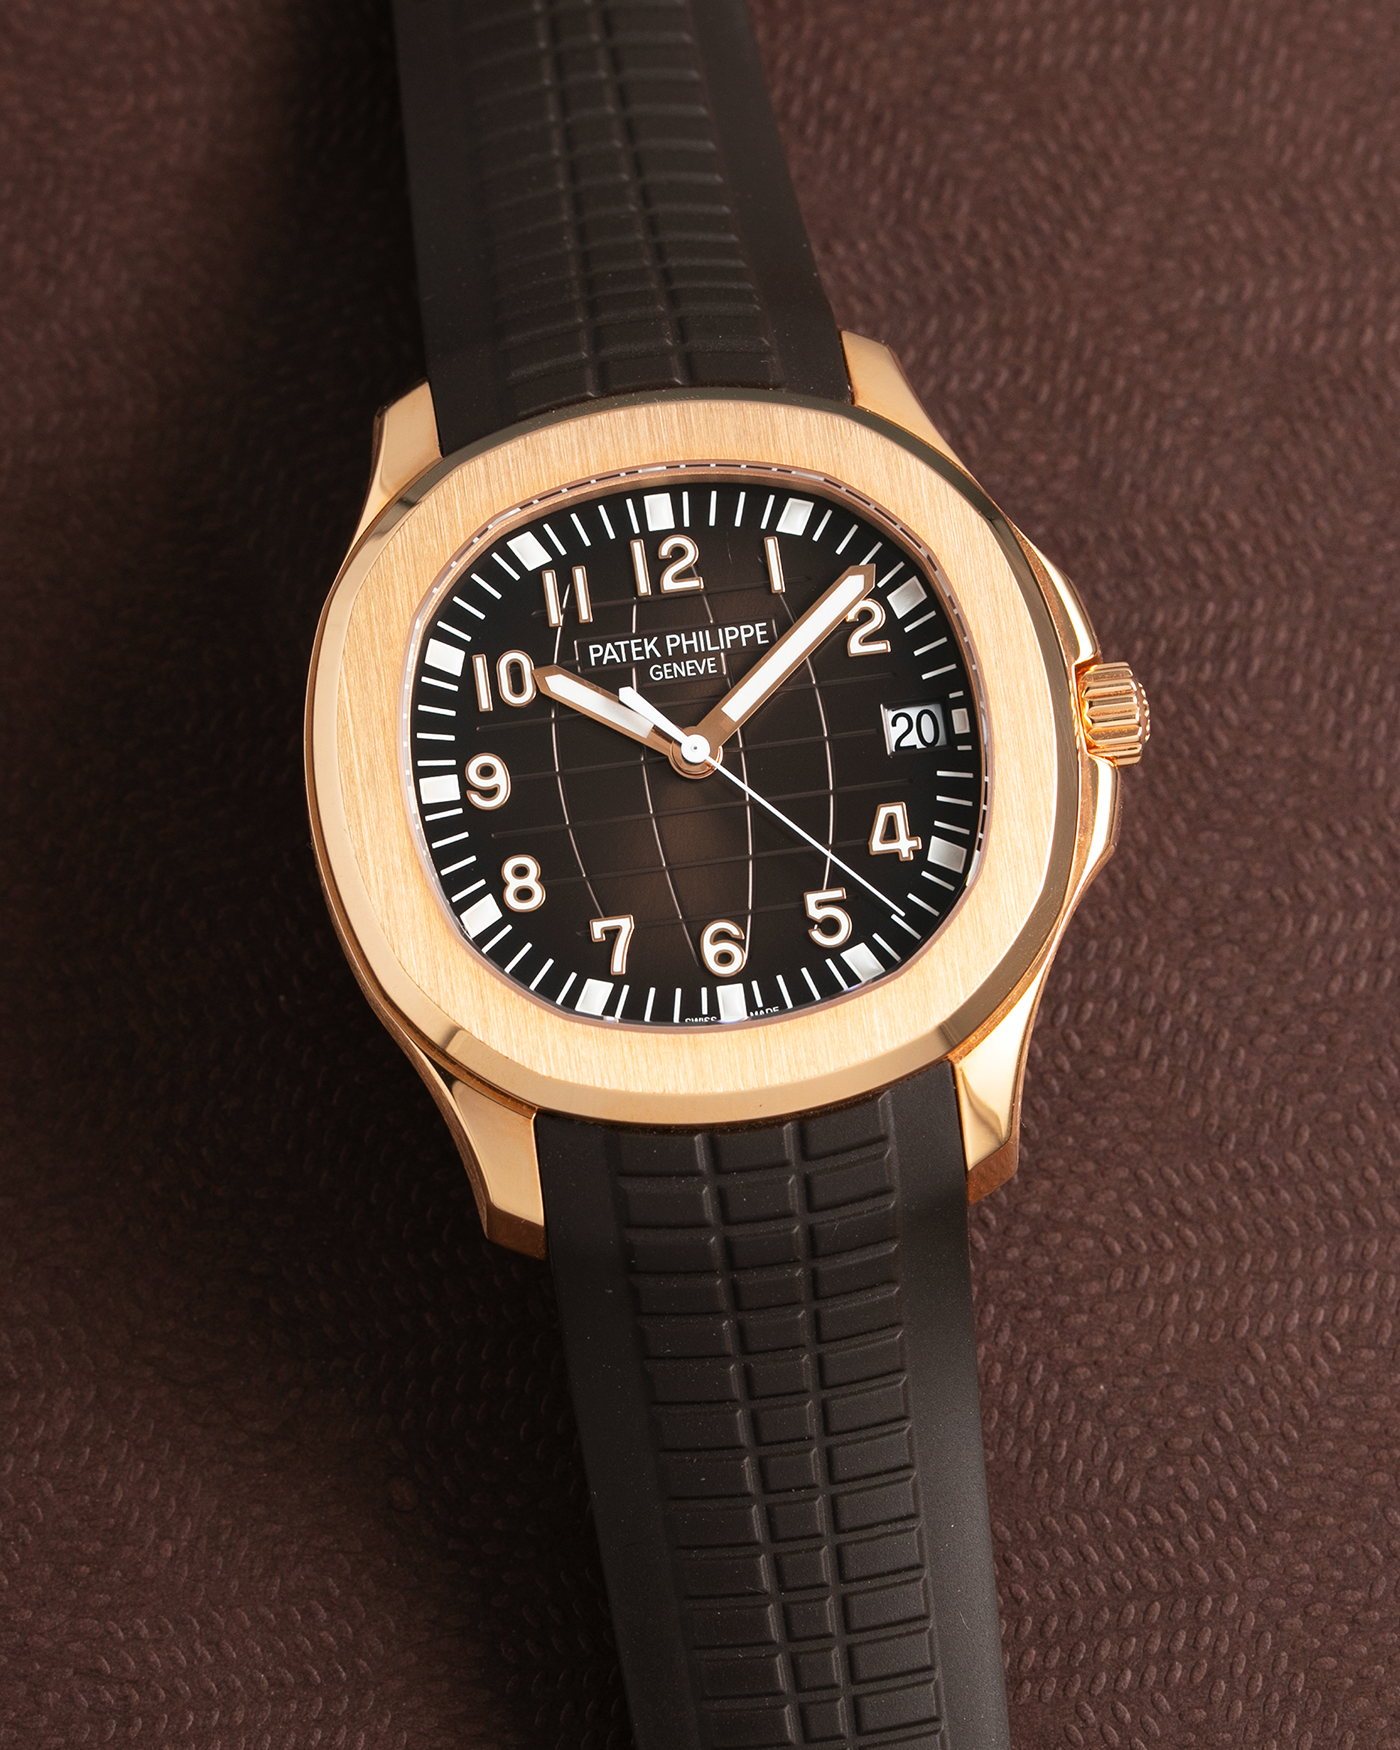 Brand: Patek Philippe Year: 2018 Model: Aquanaut Reference Number: 5167R Material: Stainless Steel Movement: Self Winding Patek Philippe Caliber 324 S C Case Diameter: 40mm Strap: Patek Philippe Aquanaut Brown Rubber Strap